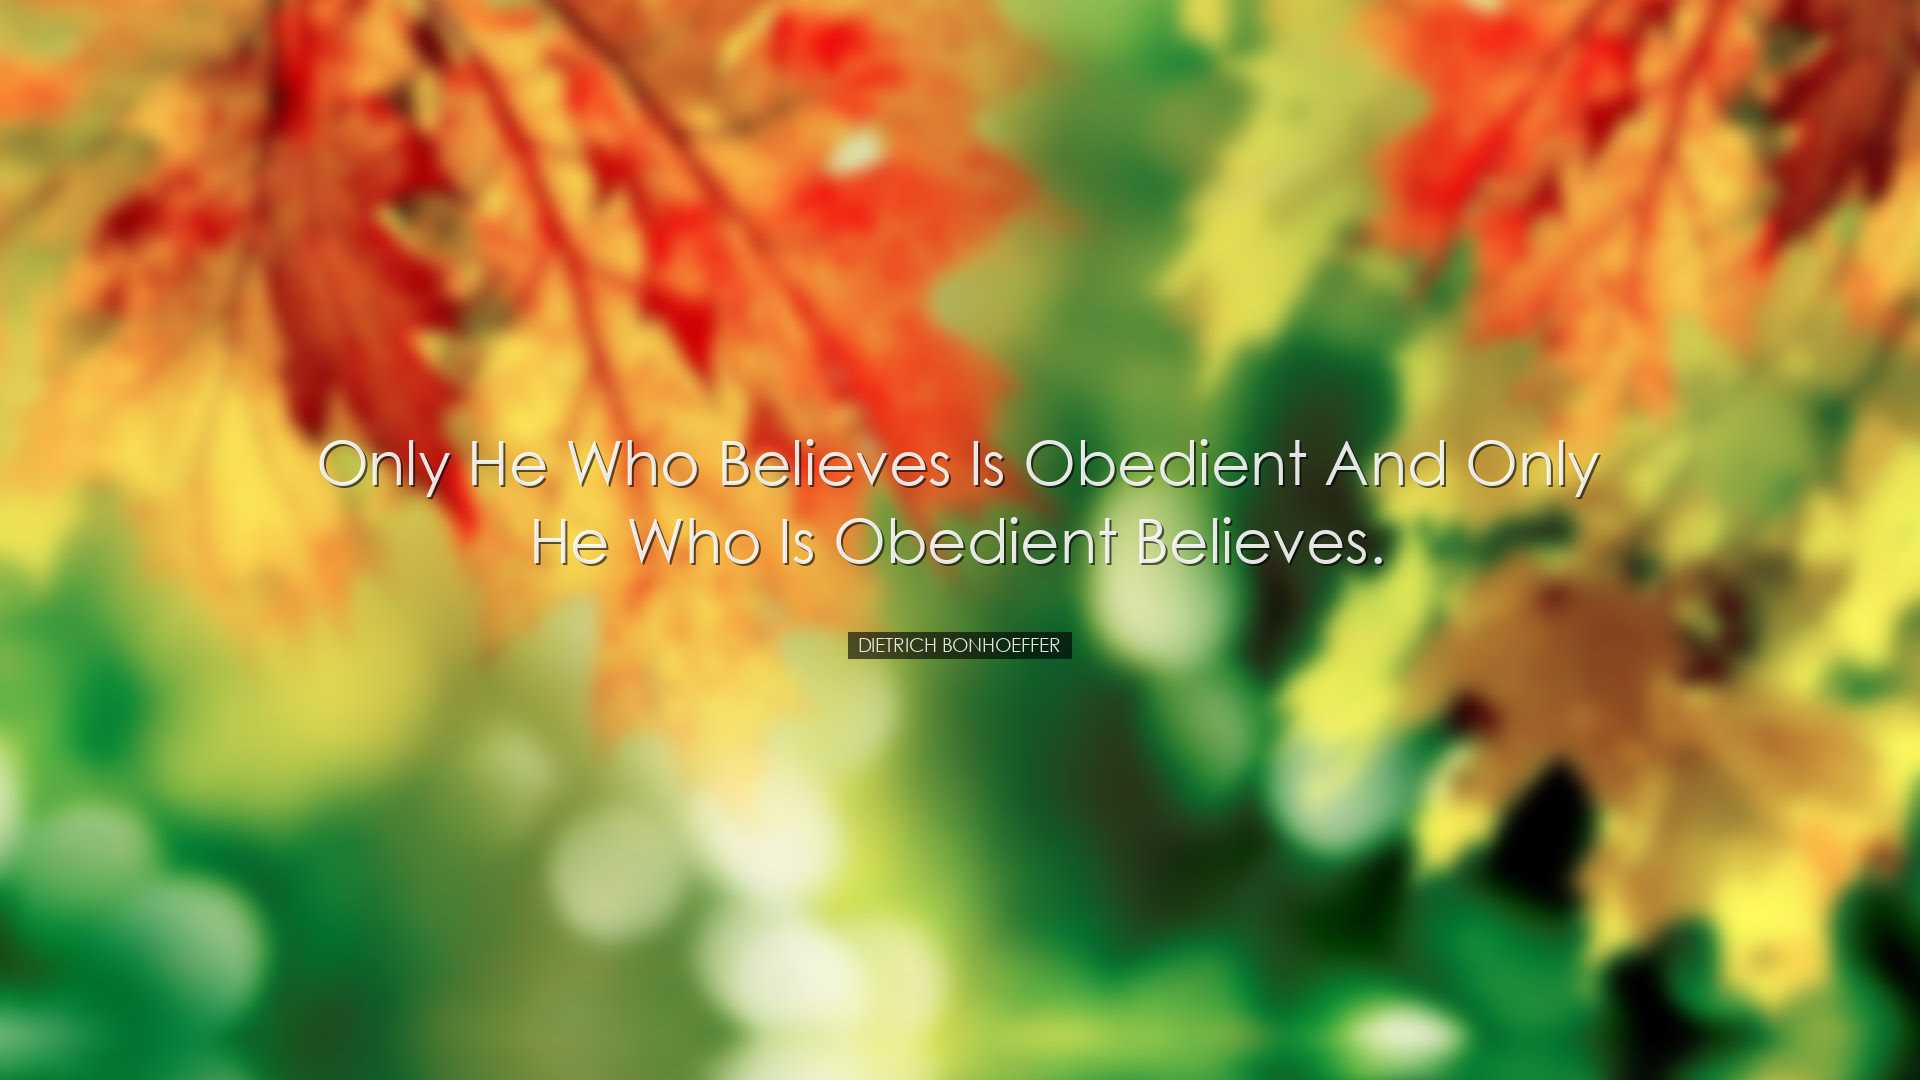 Only he who believes is obedient and only he who is obedient belie